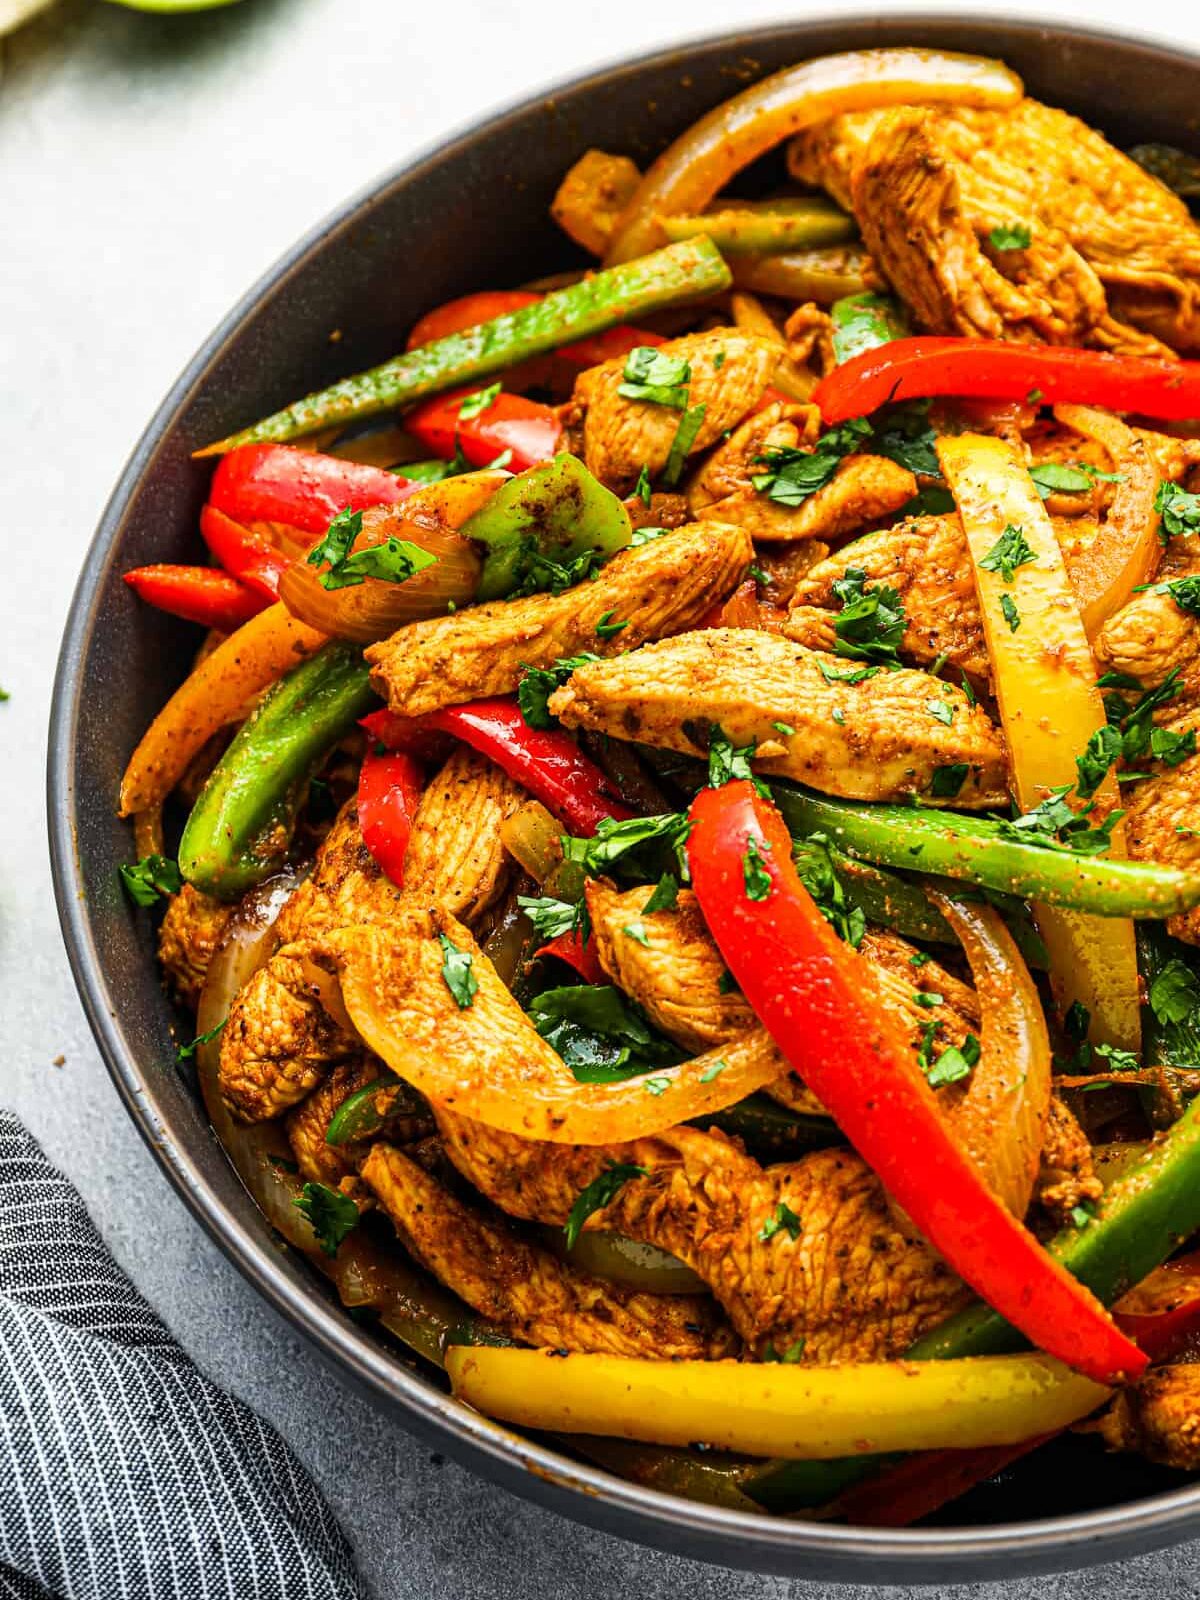 three-quarters view of chicken fajitas filling (strips of chicken and peppers) in a black bowl.